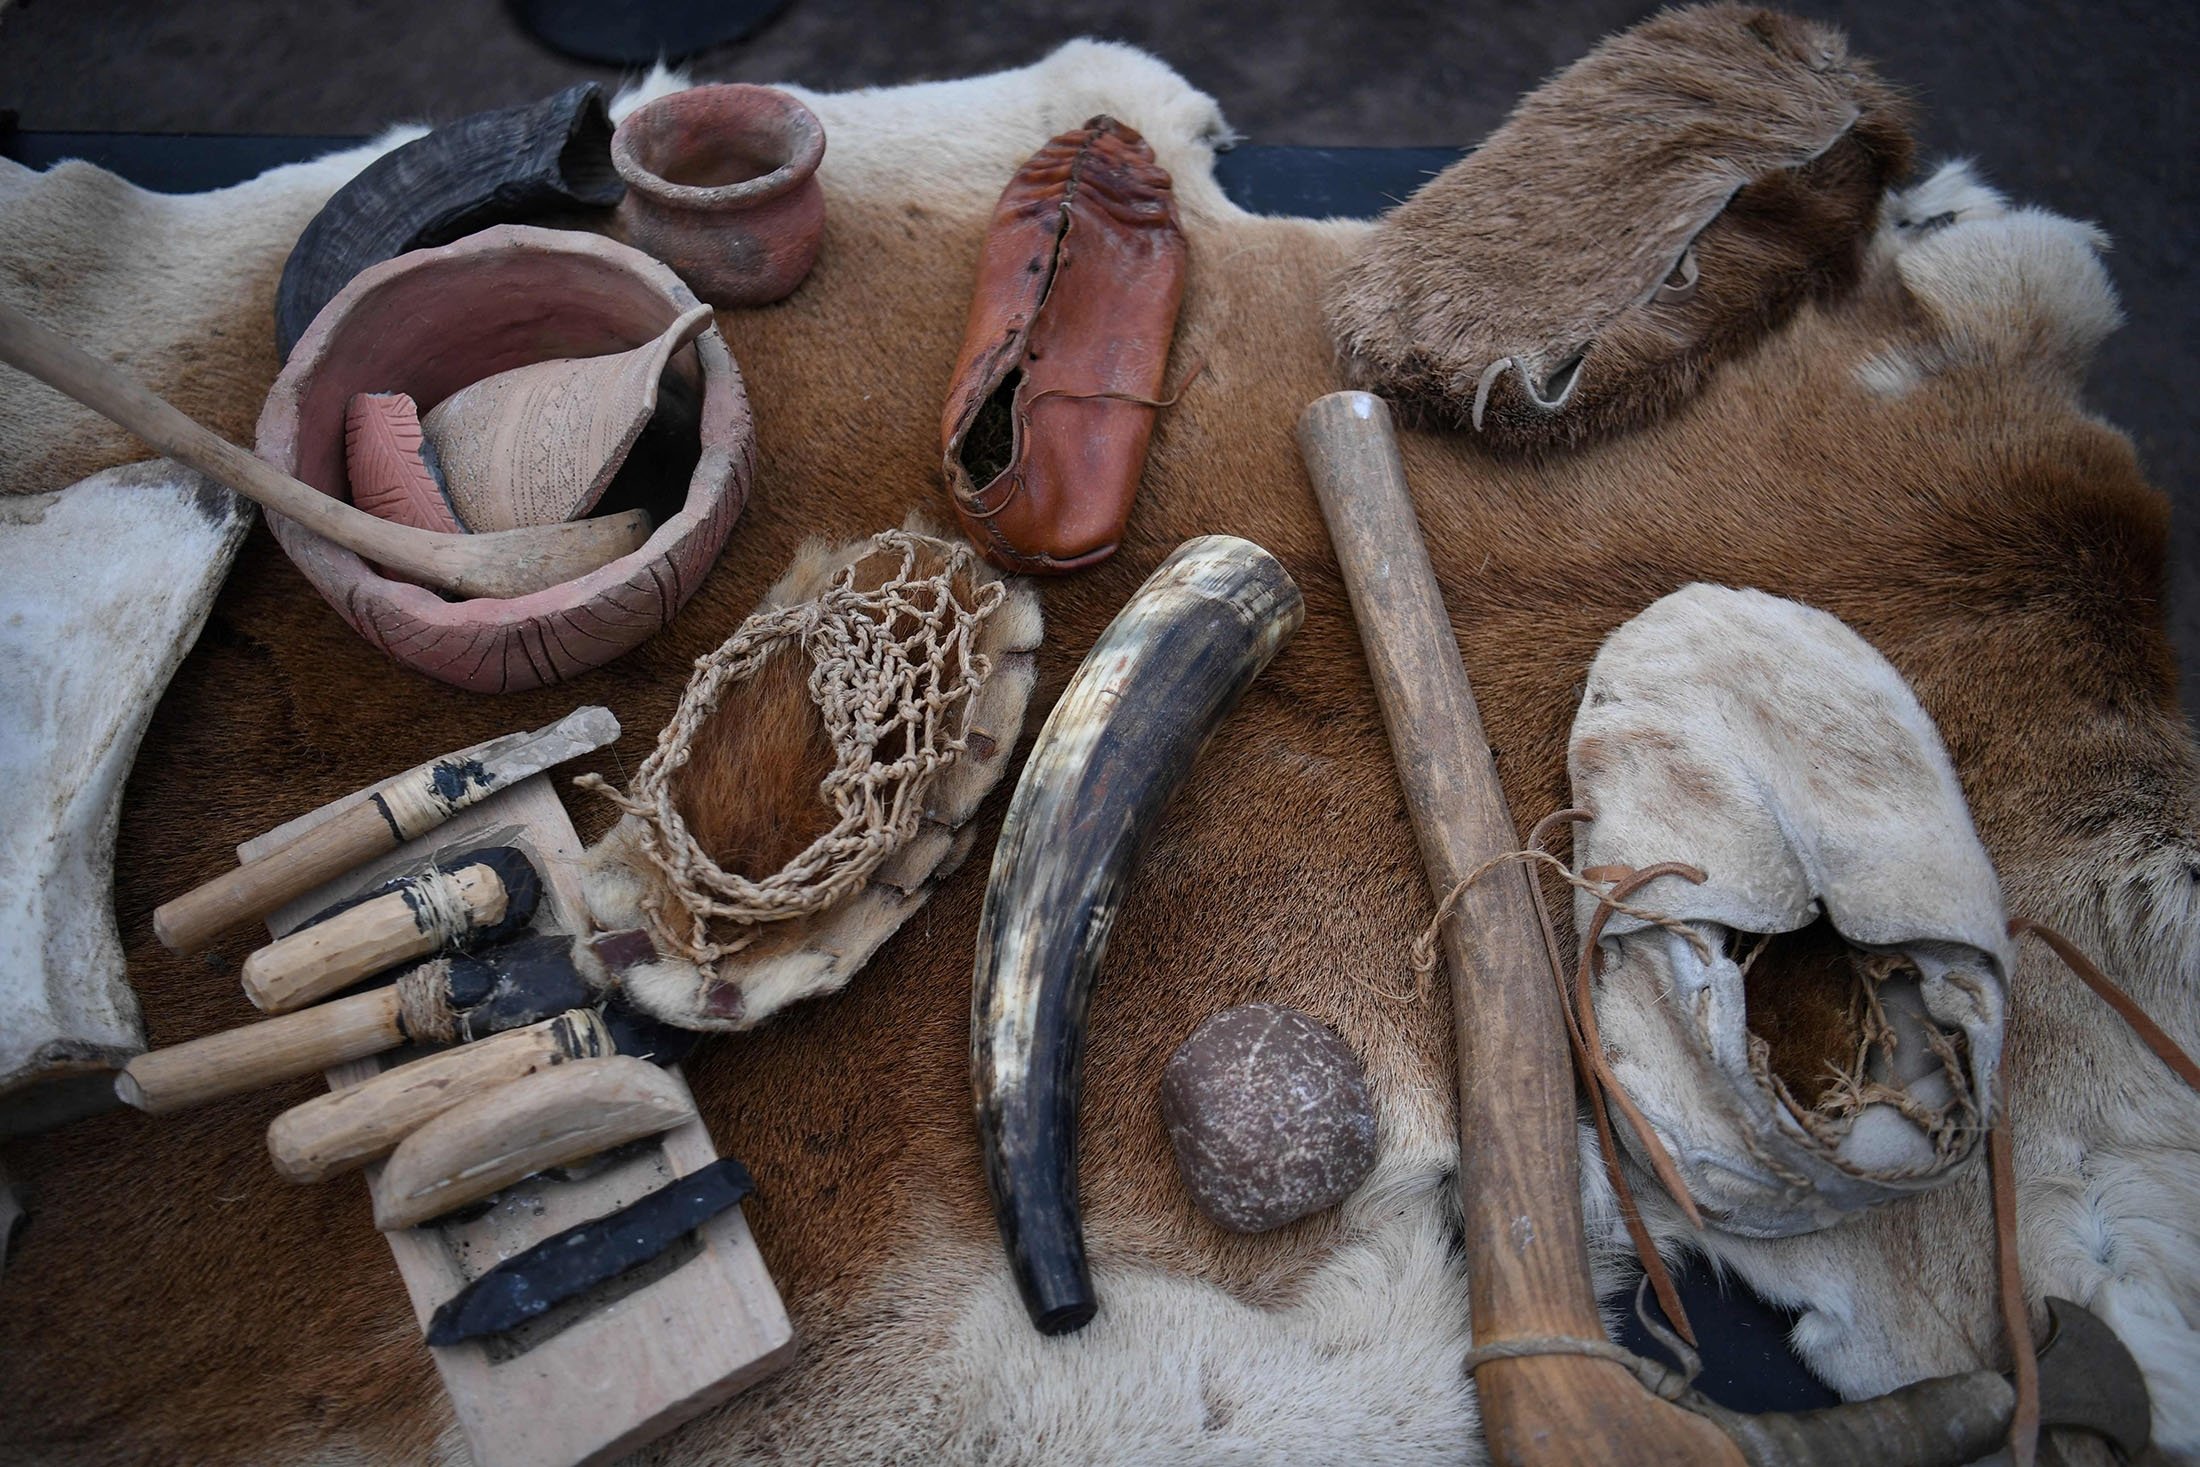 A display showing a recreation of the tools historians believe people used to live, is pictured at the visitor centre at Stonehenge near Amesbury, southern England, Jan. 19, 2022. (AFP Photo)